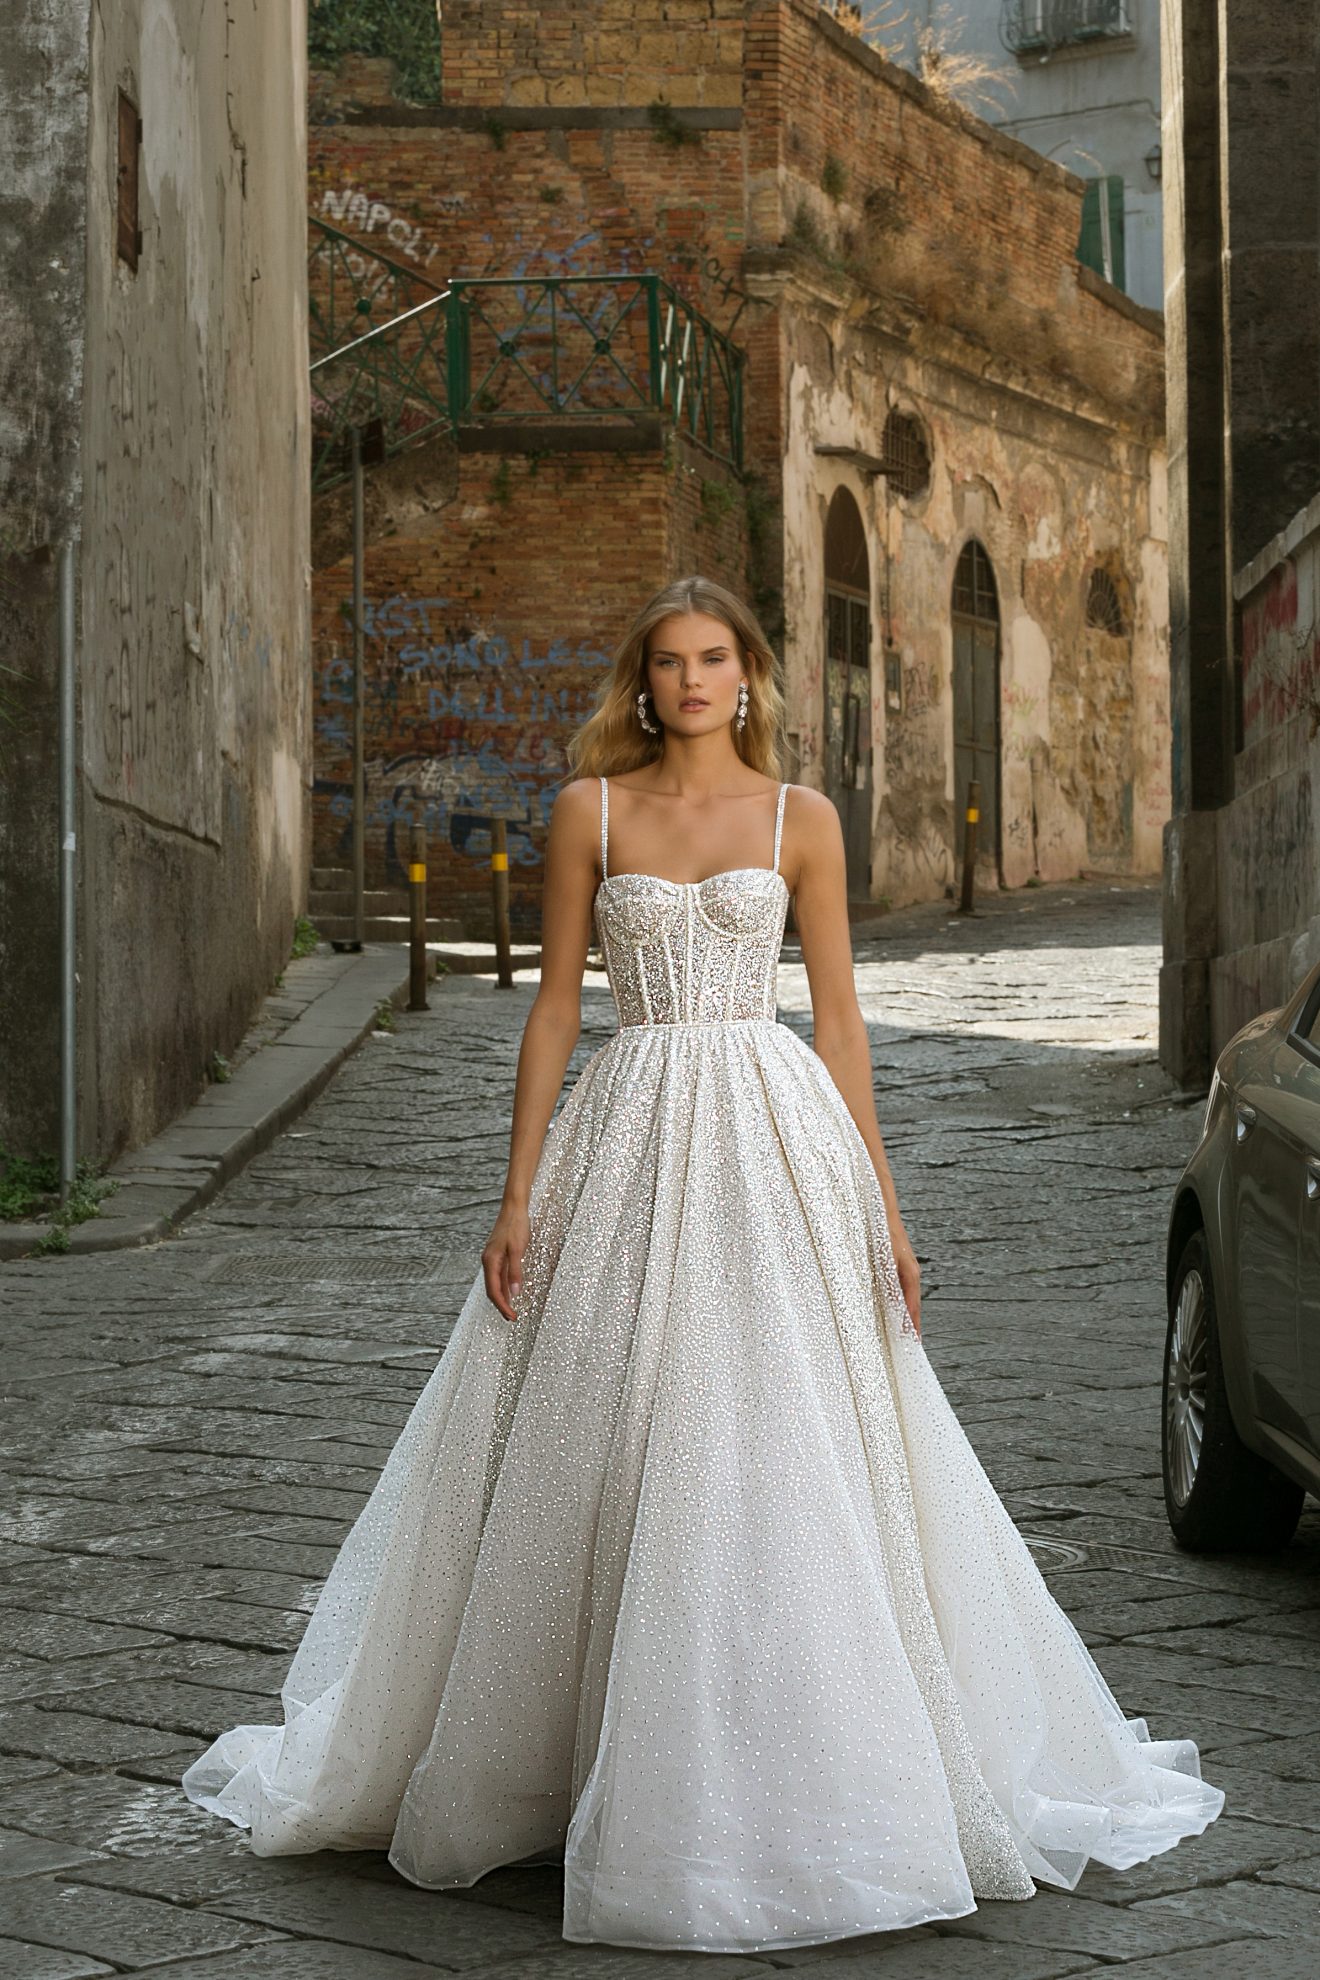 2021 Wedding Dress Trends That Are ...